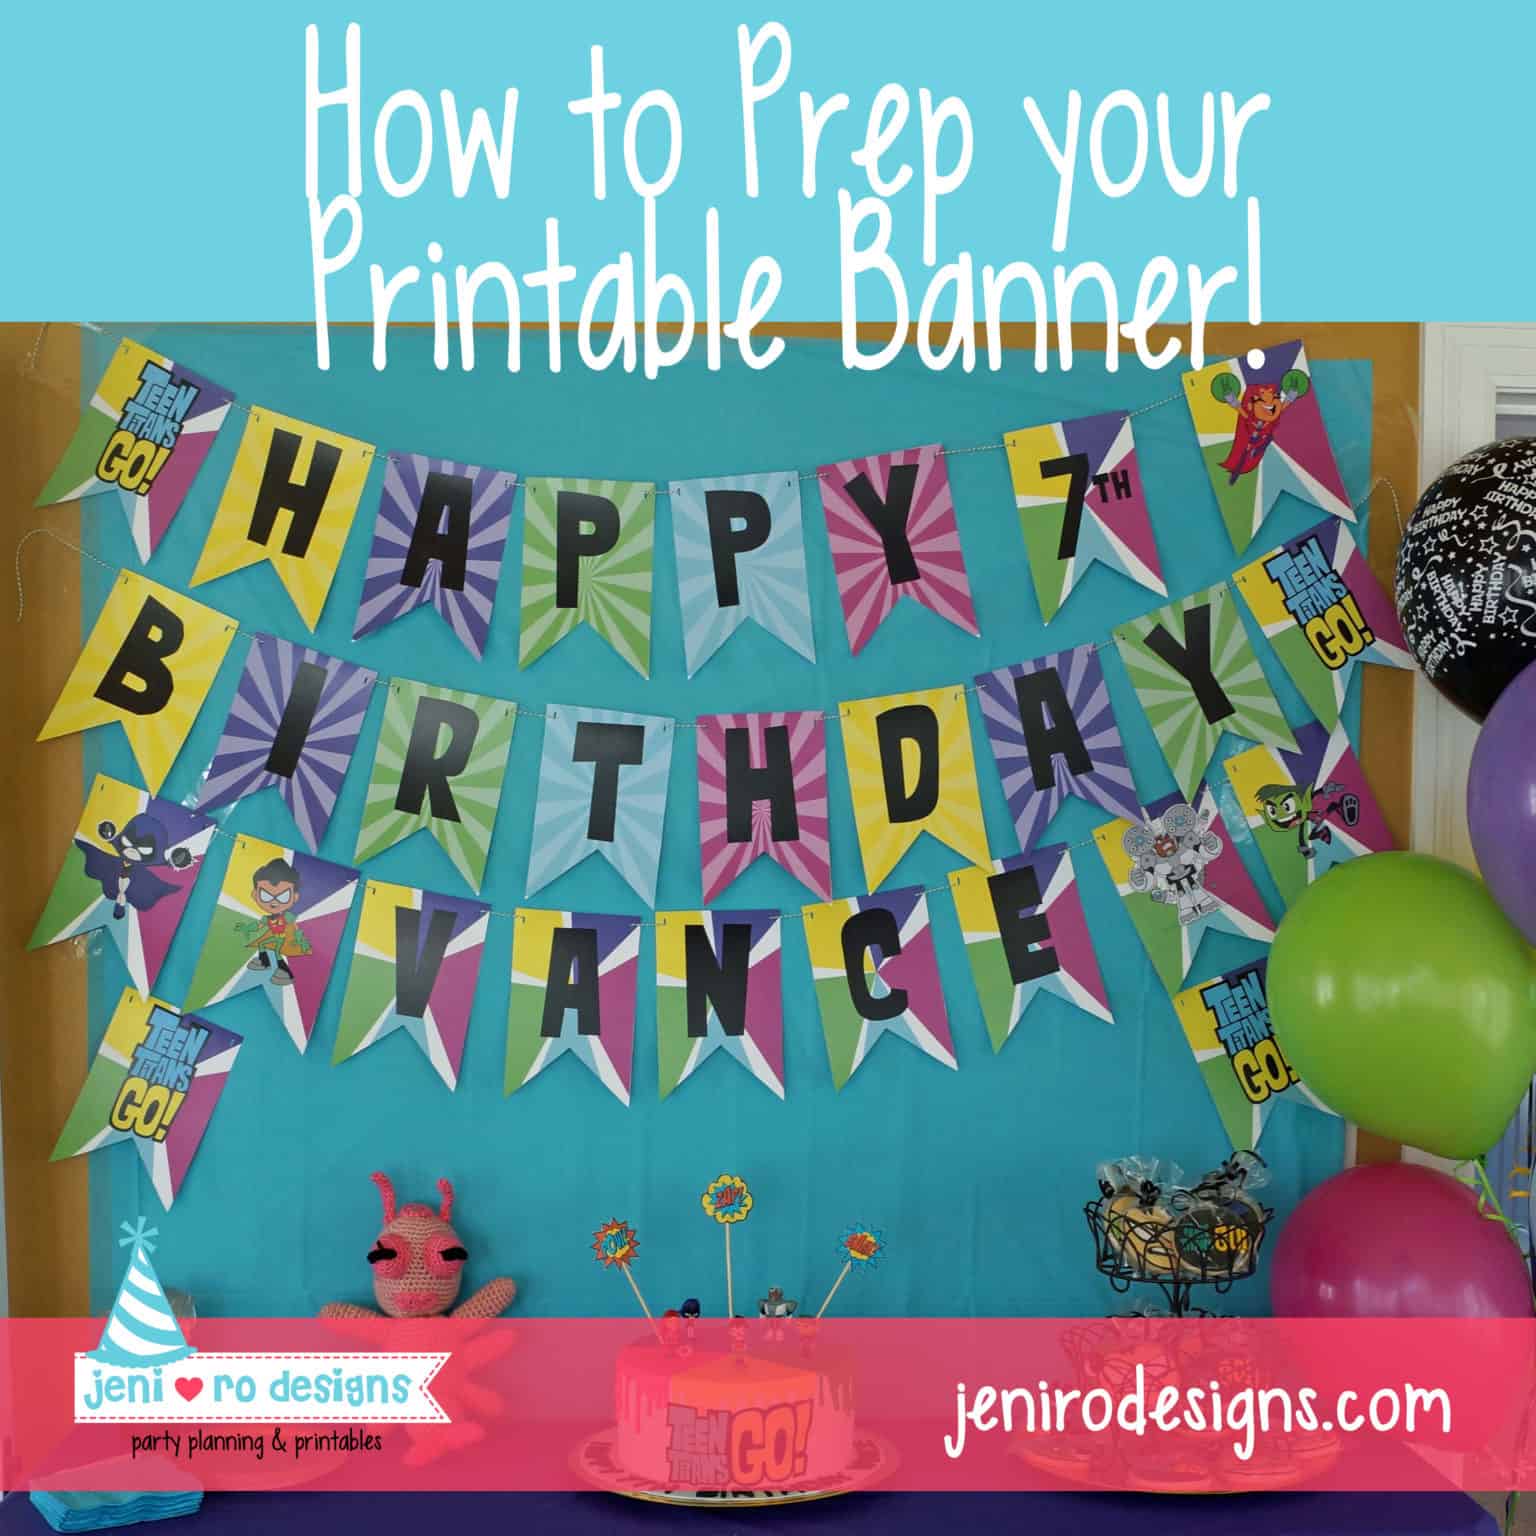 Printable Banner prep made easy with a video tutorial from jeni ro designs